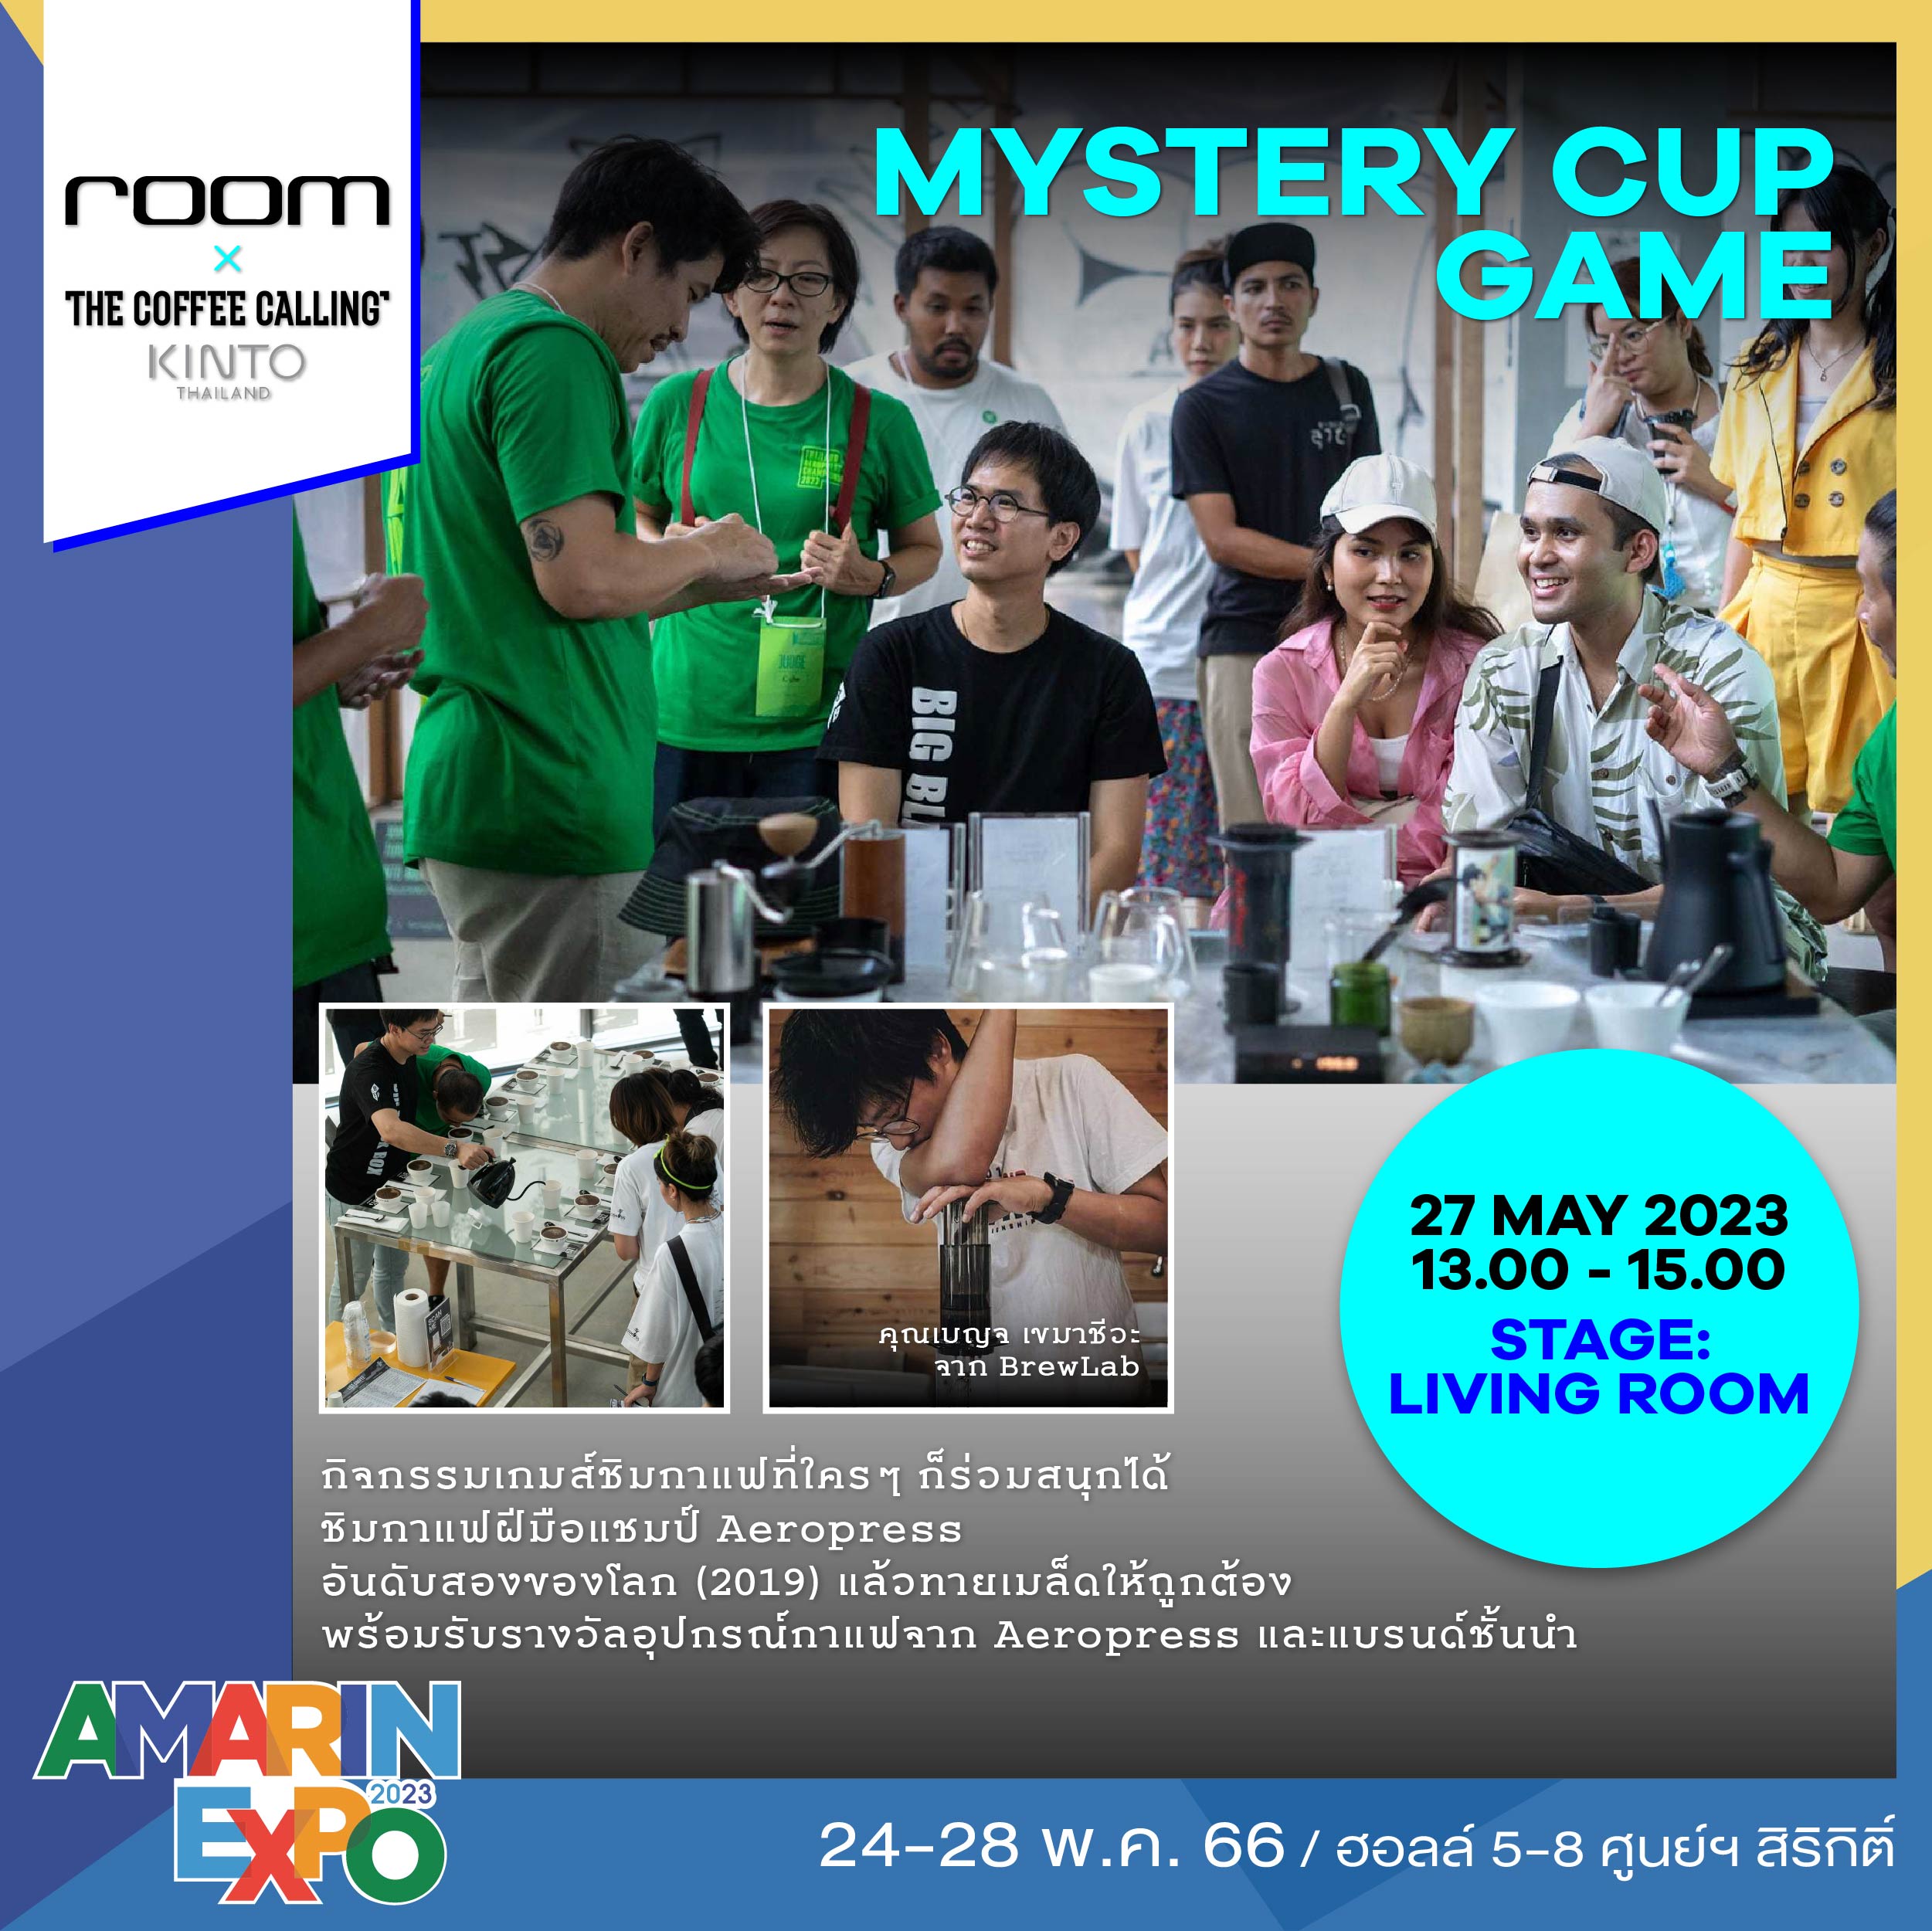 ROOM Mystery Cup Game